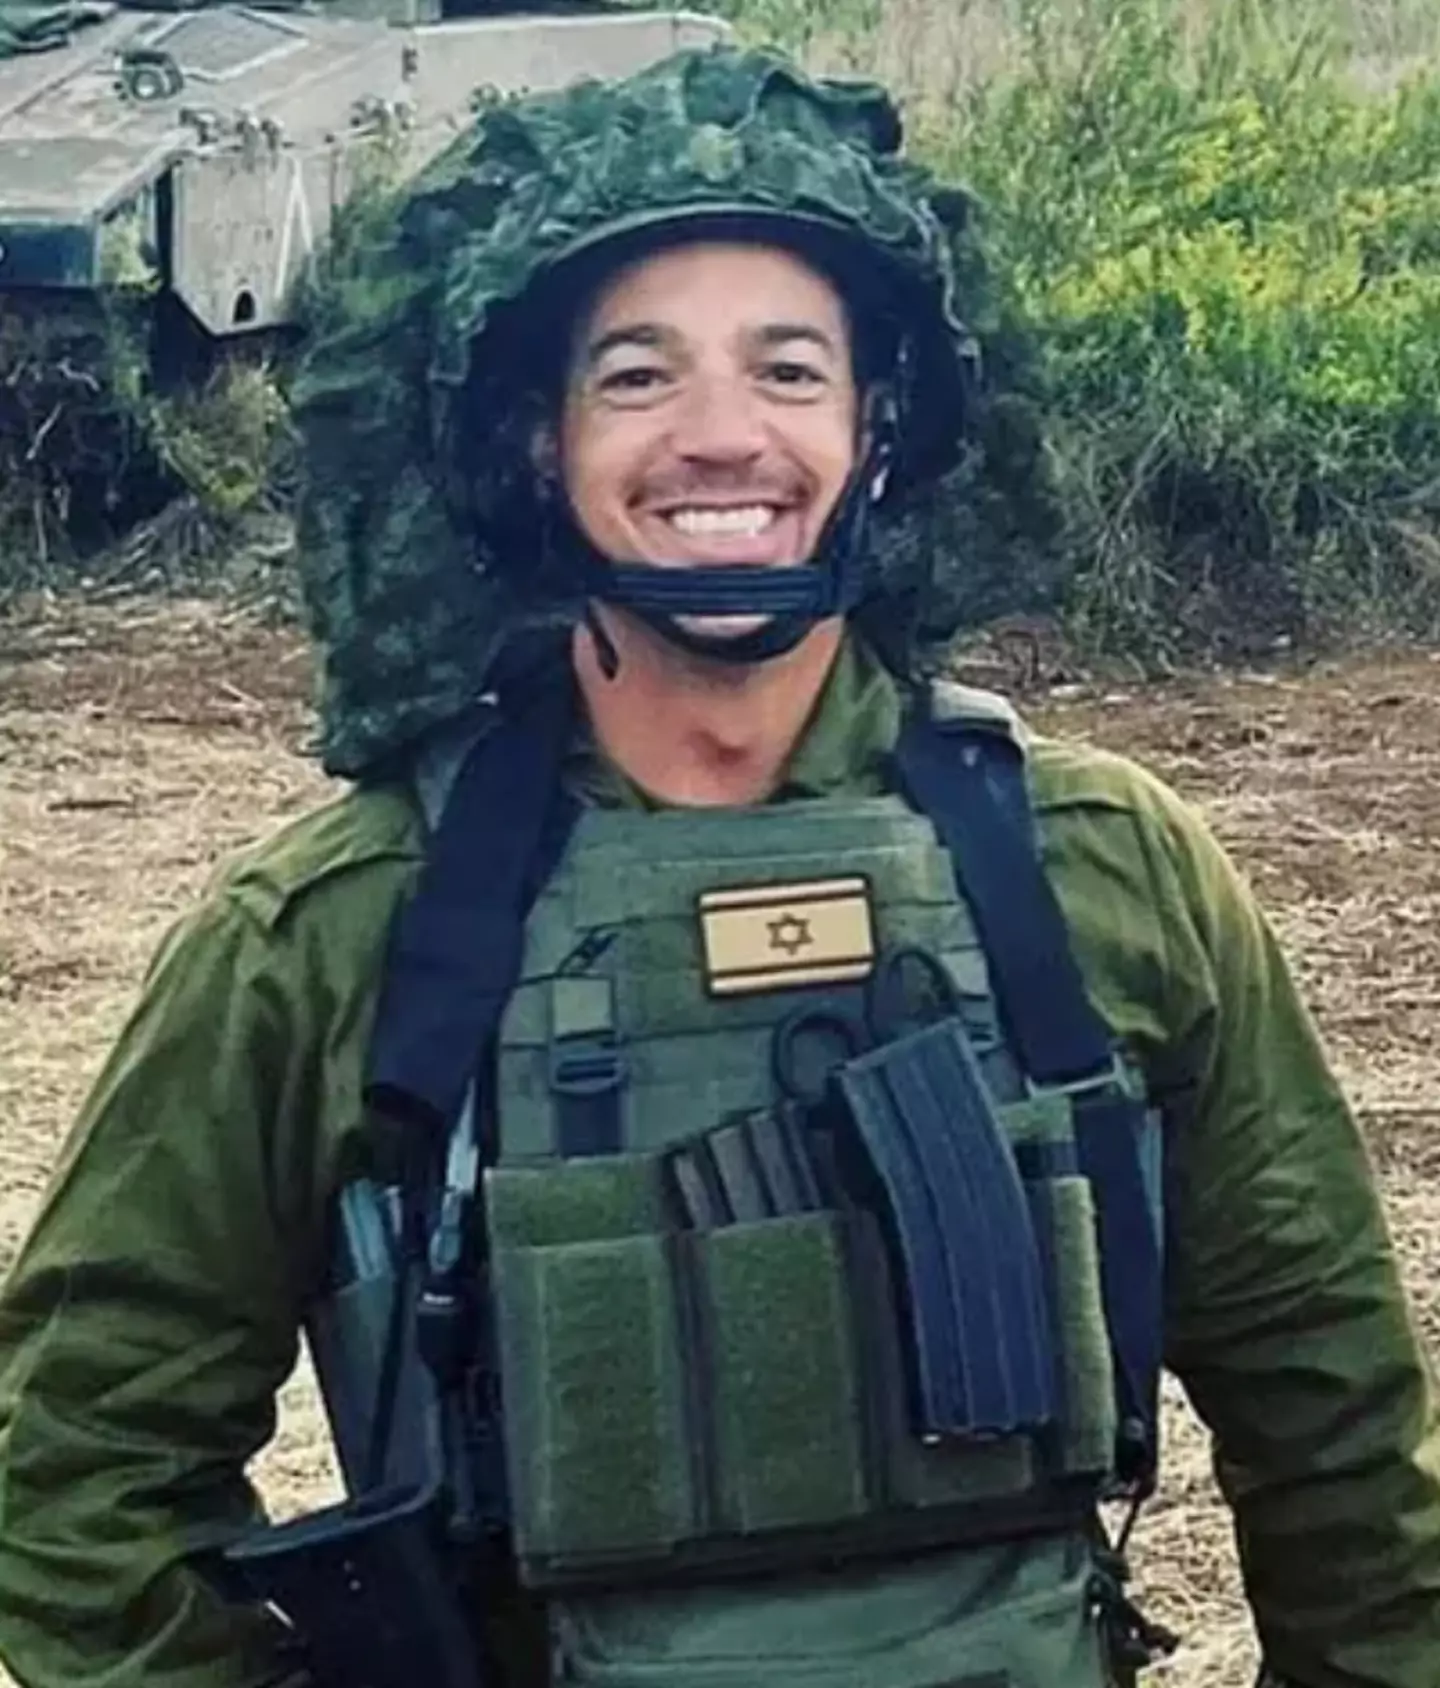 The unnamed guard previously fought for the IDF.